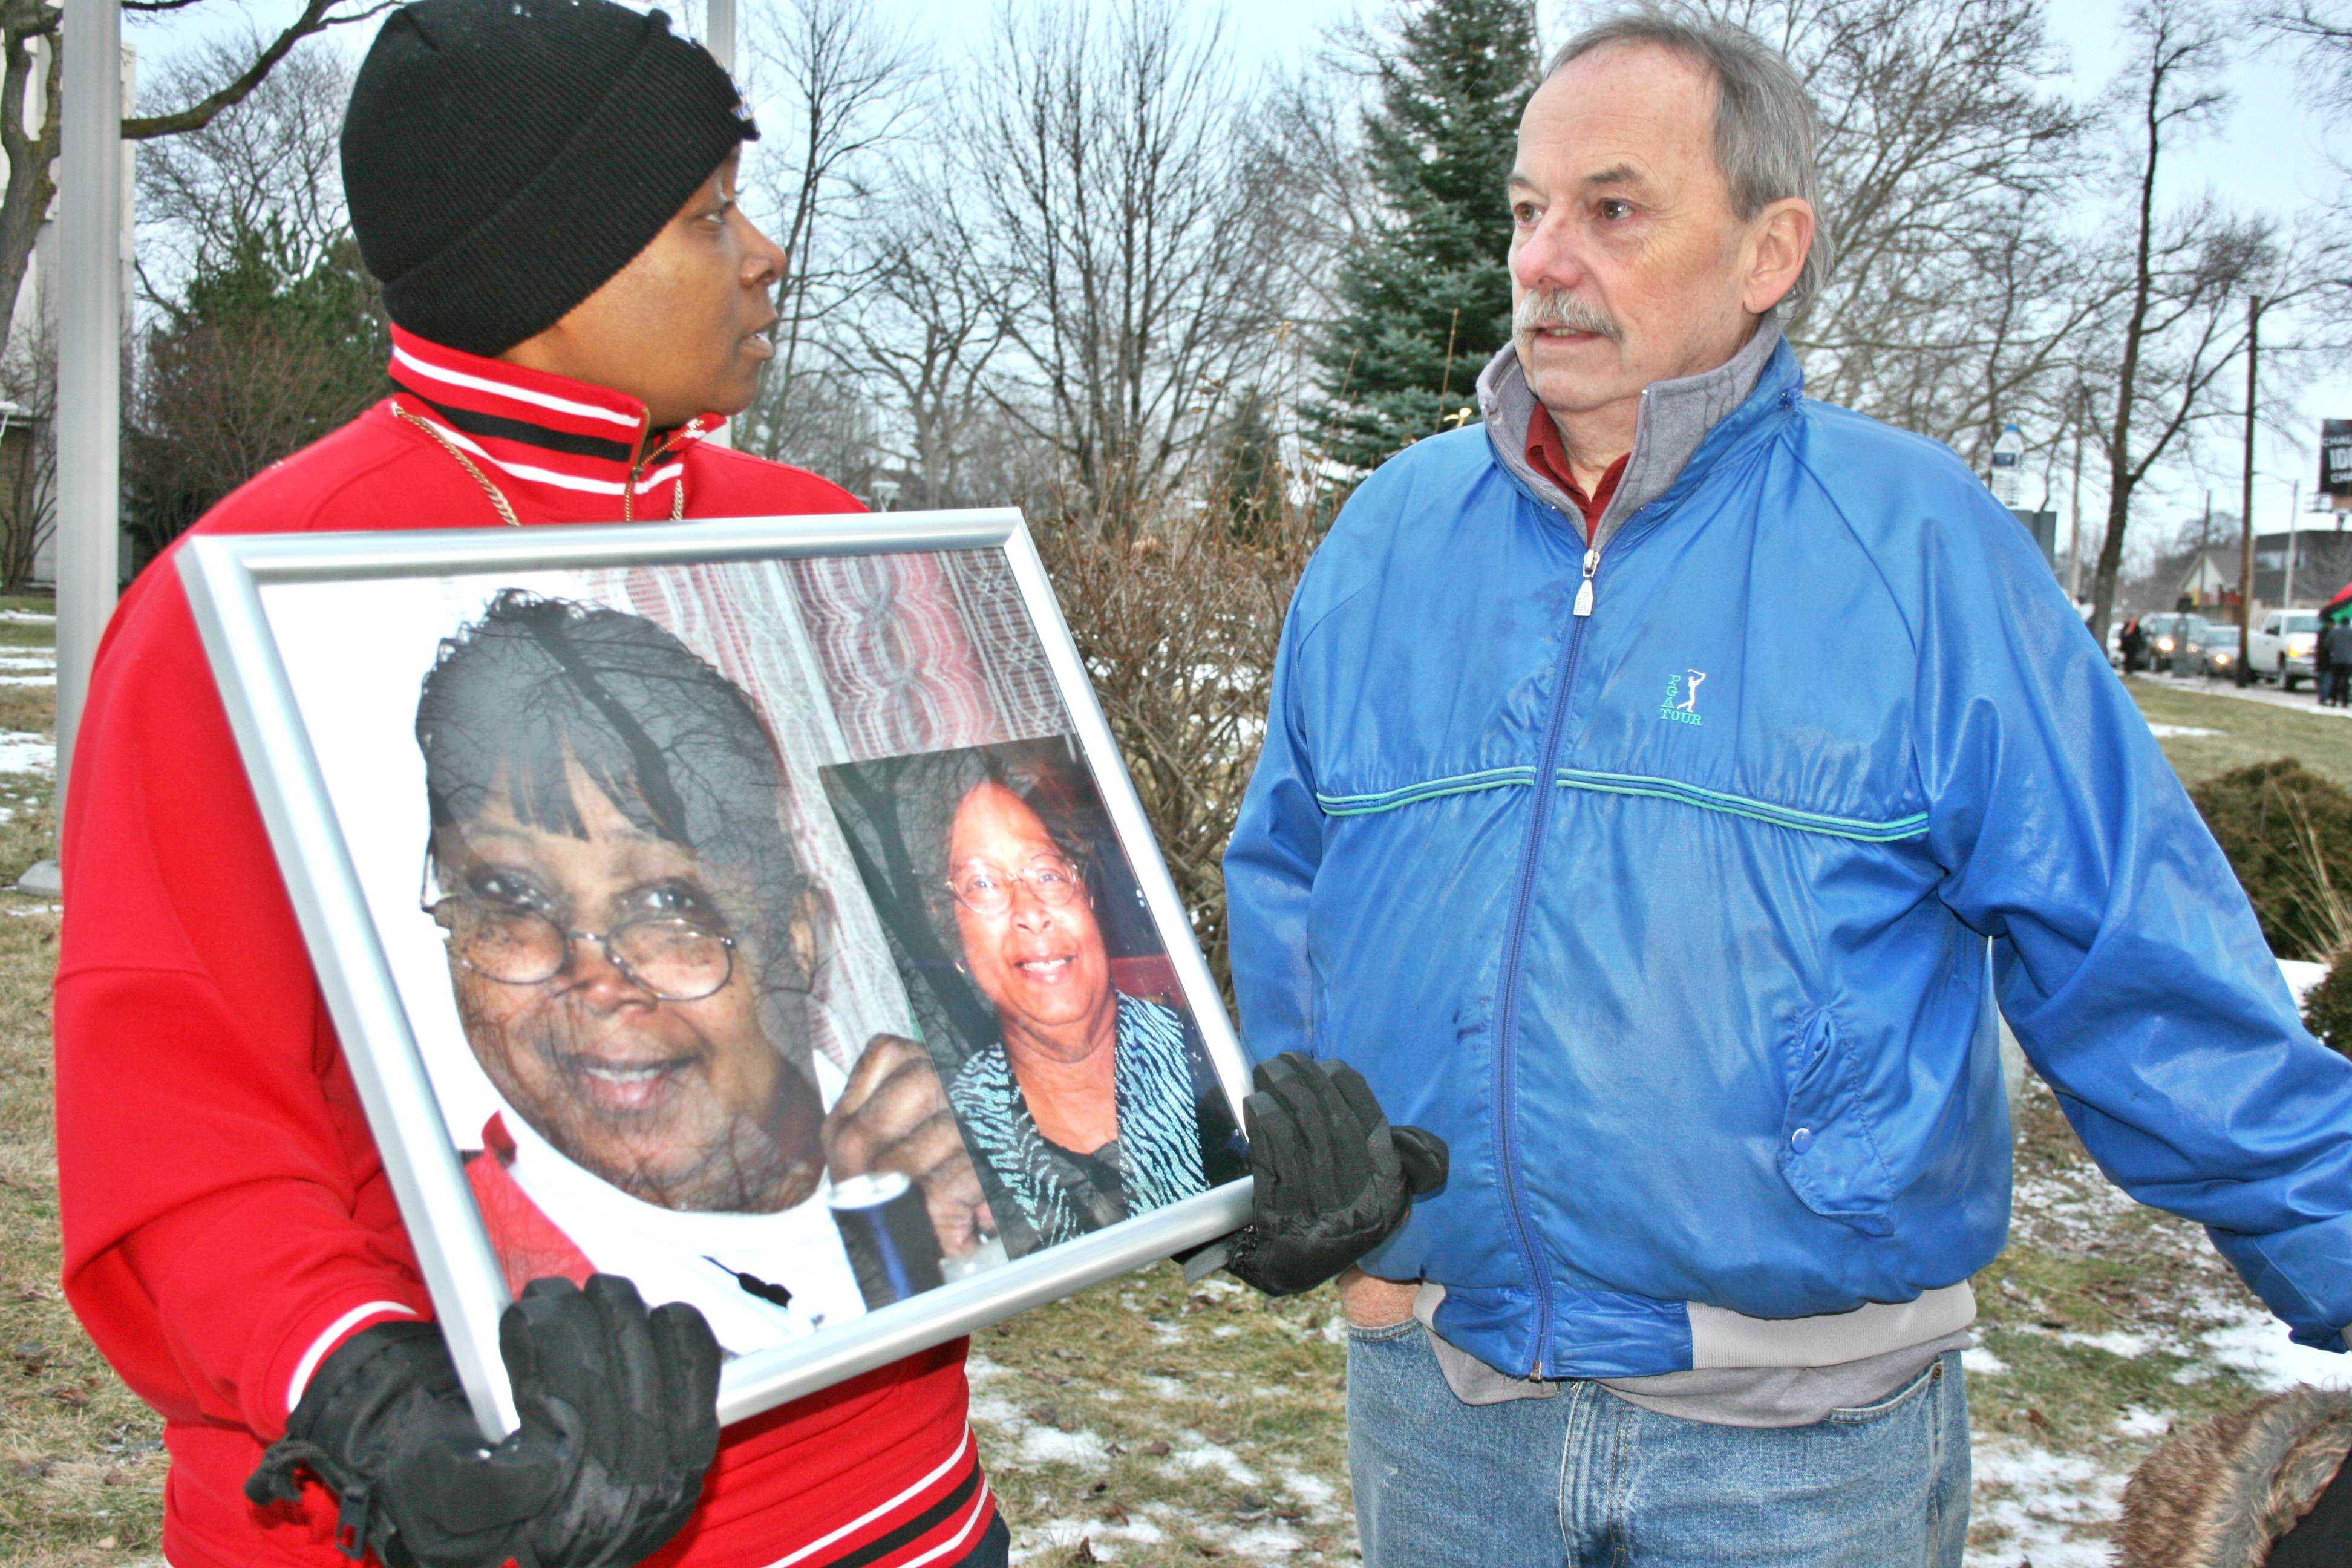 Holding a picture of her mother, Ms. Cholyanda Brown tells a man the story of her mother's death due to Legionnaire's disease at a Flint clean water protest outside Flint City Hall on Saturday, Jan. 16.